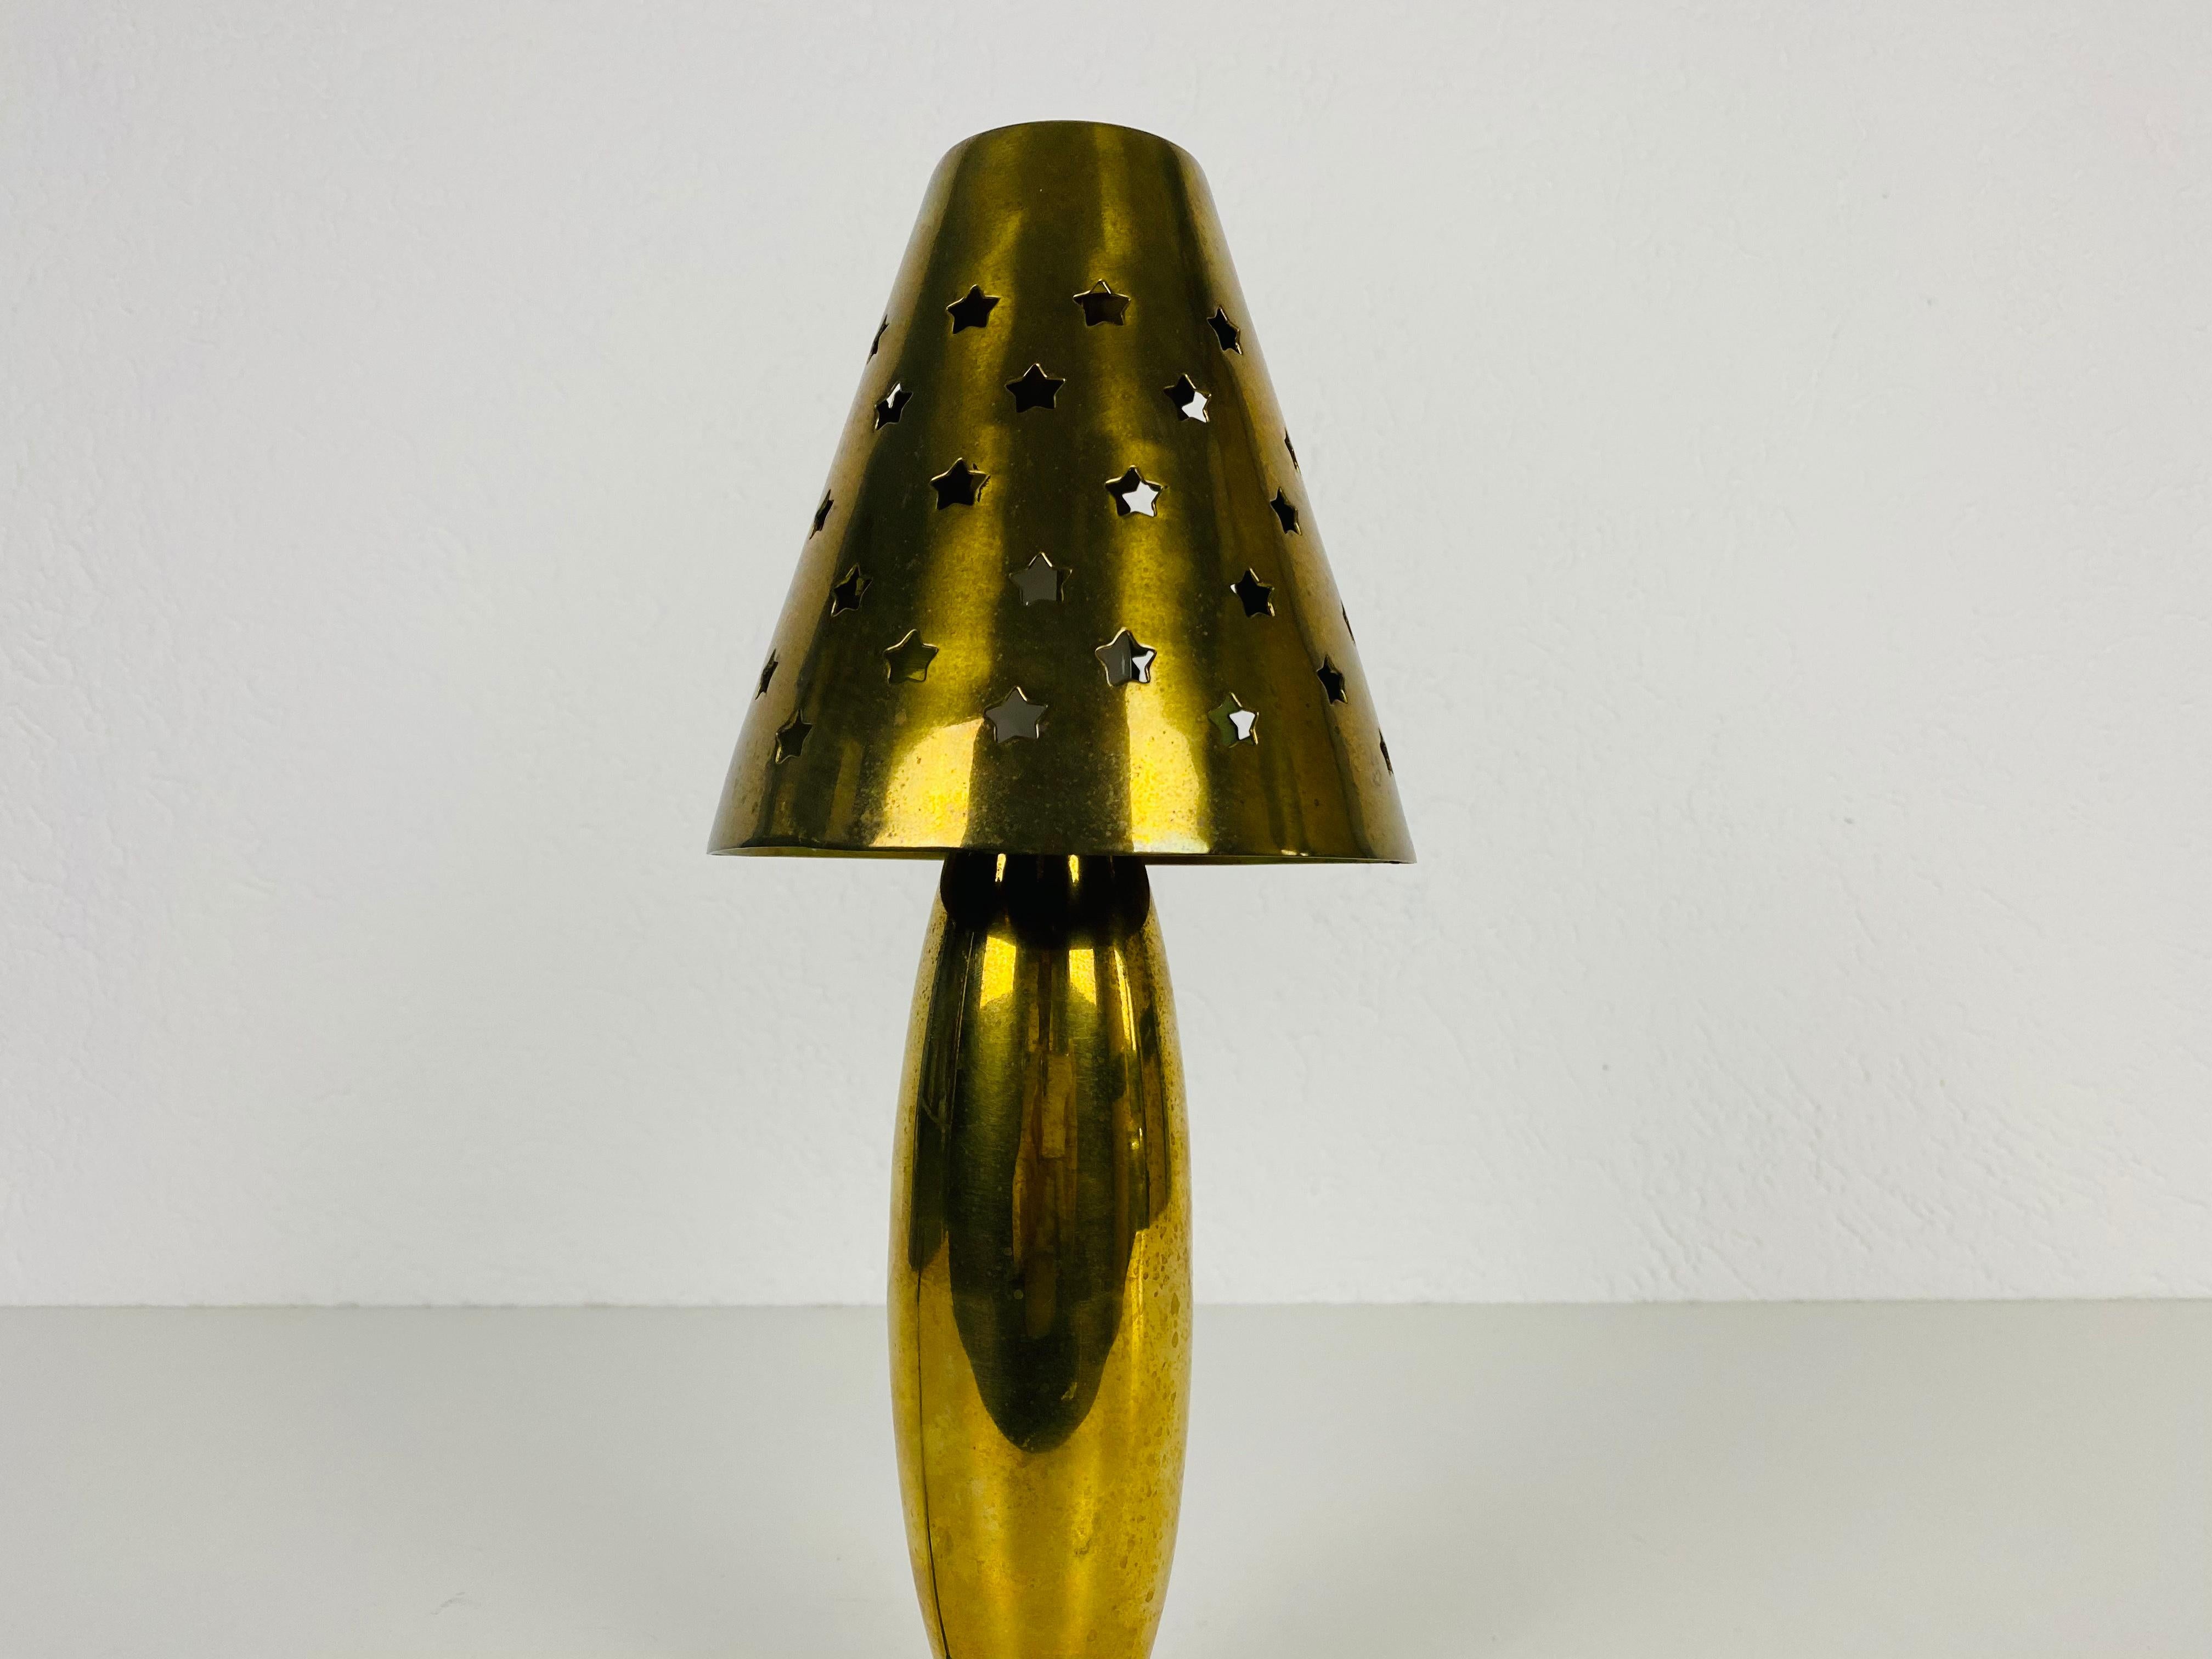 Midcentury Solid Brass Table Lamp by Studio Lambert, 1980s For Sale 3